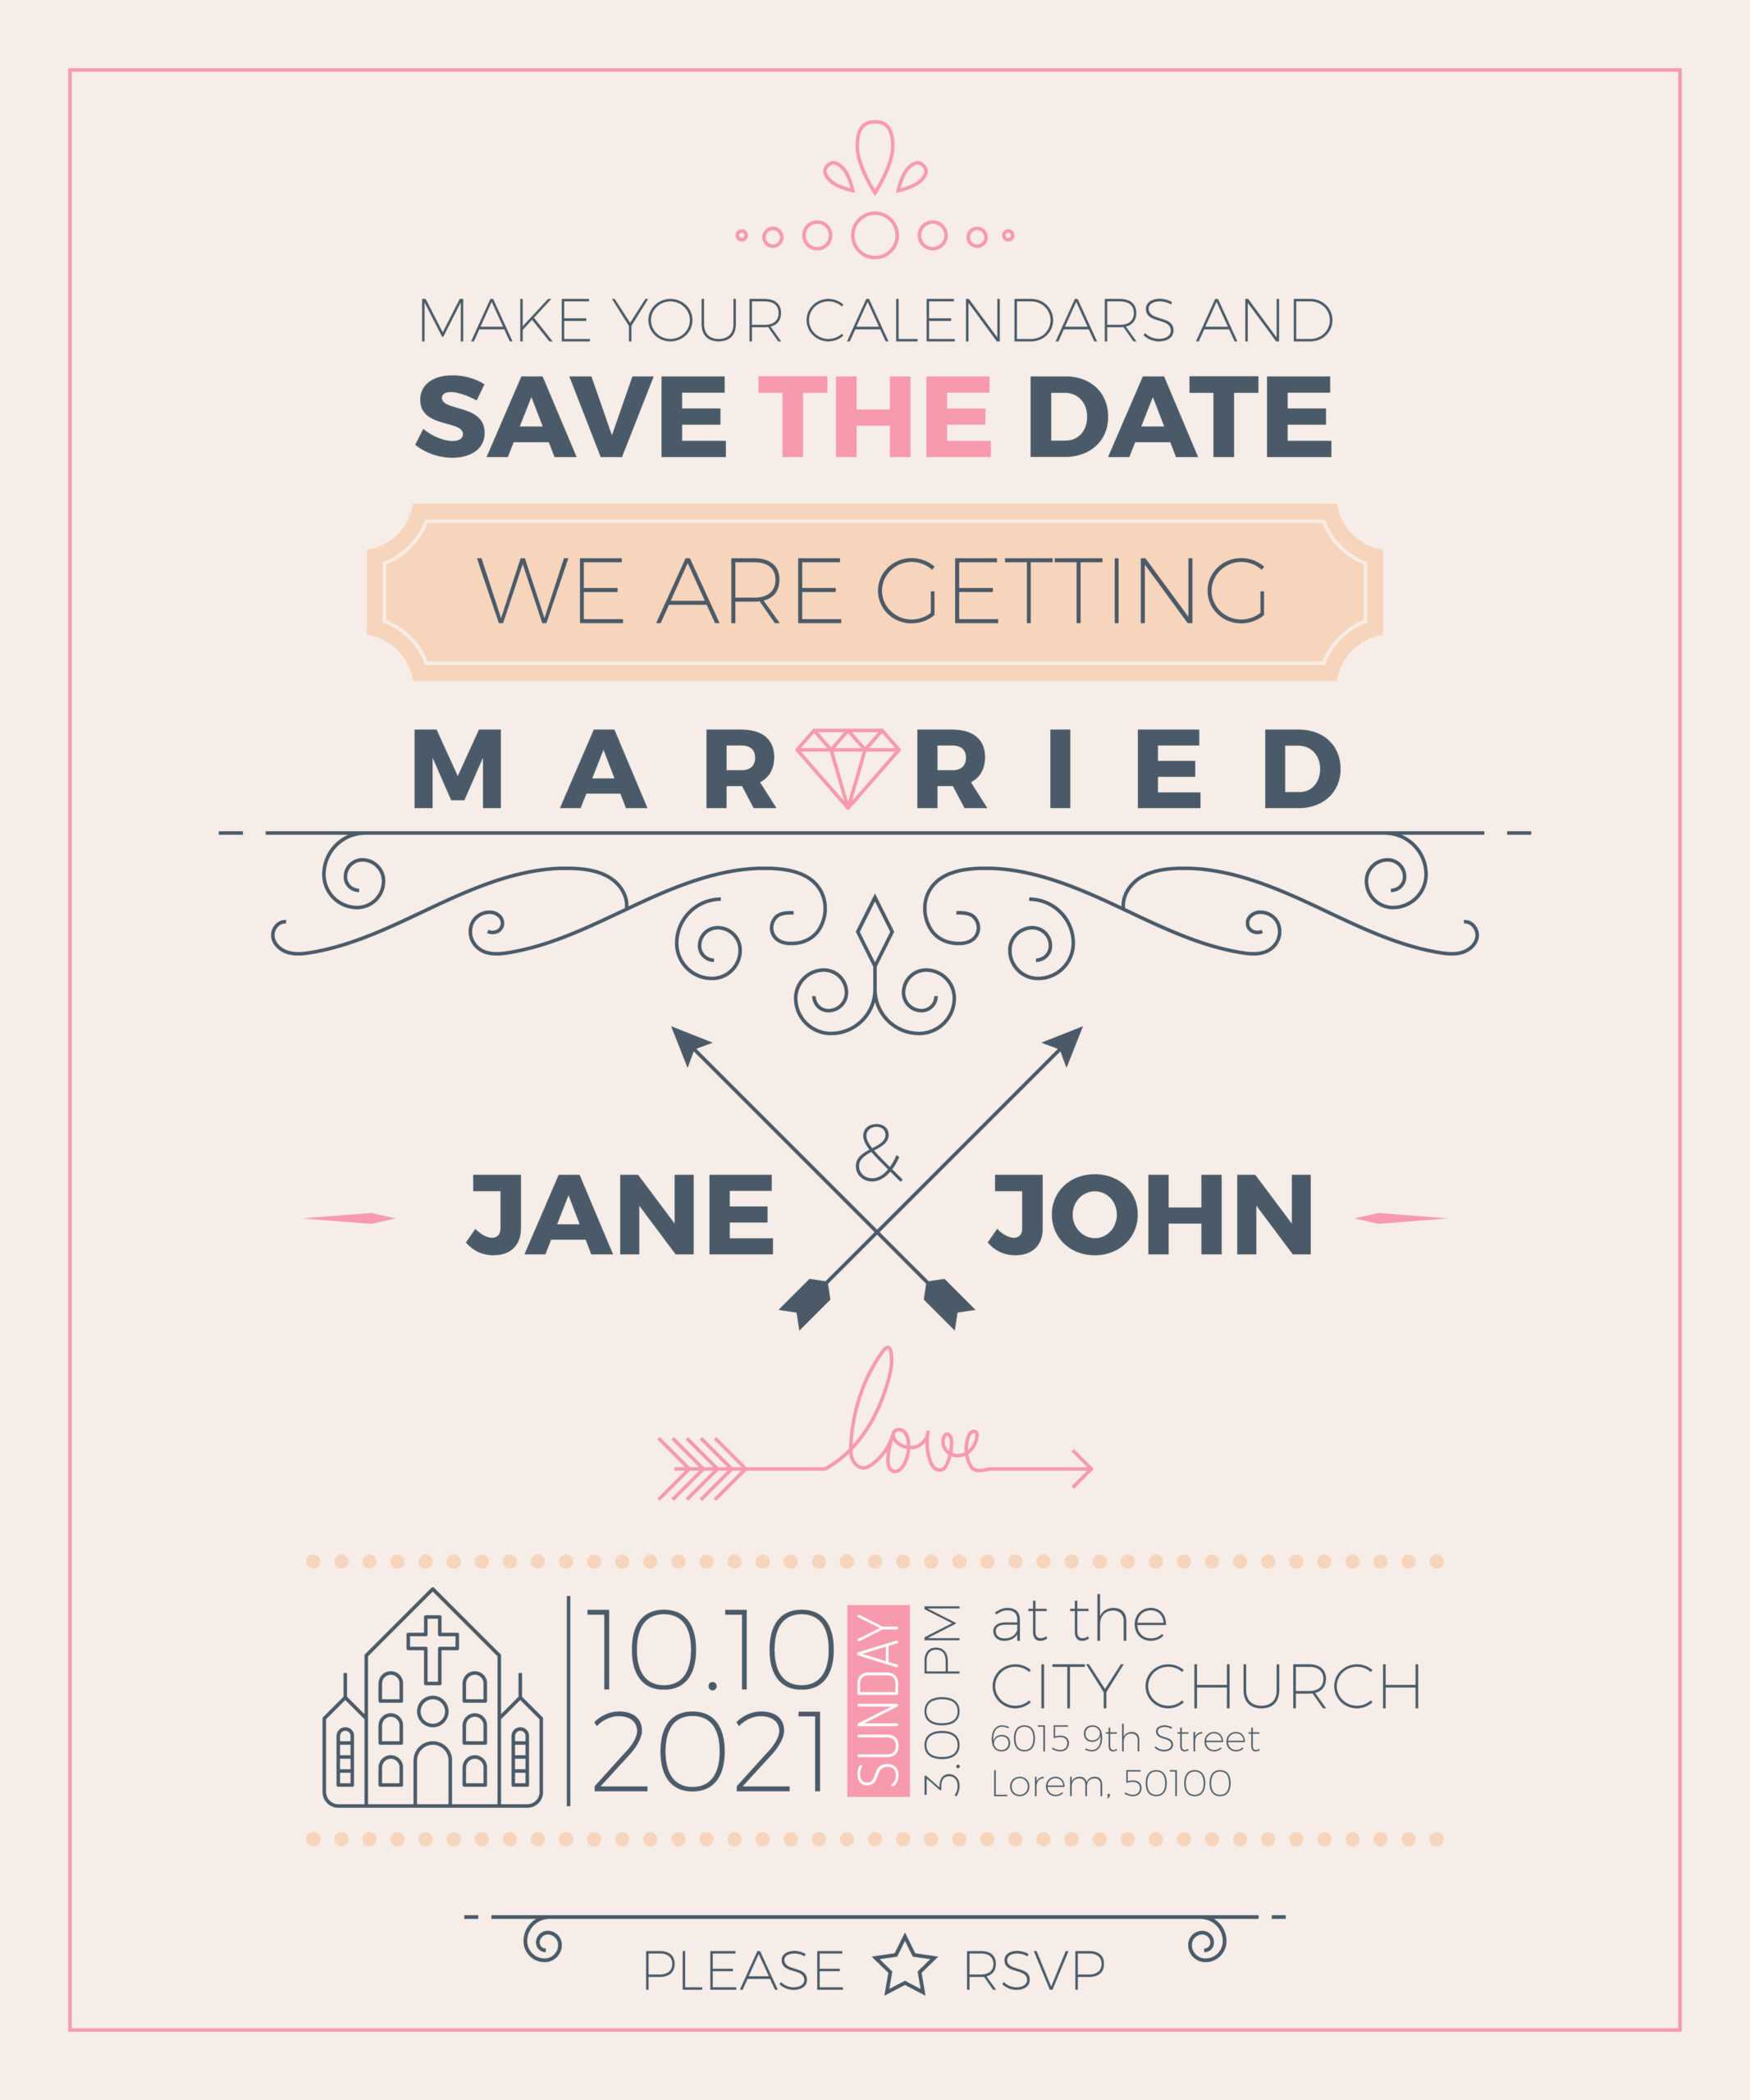 Vintage Wedding Invitation Card Template – Download Free Pertaining To Church Wedding Invitation Card Template